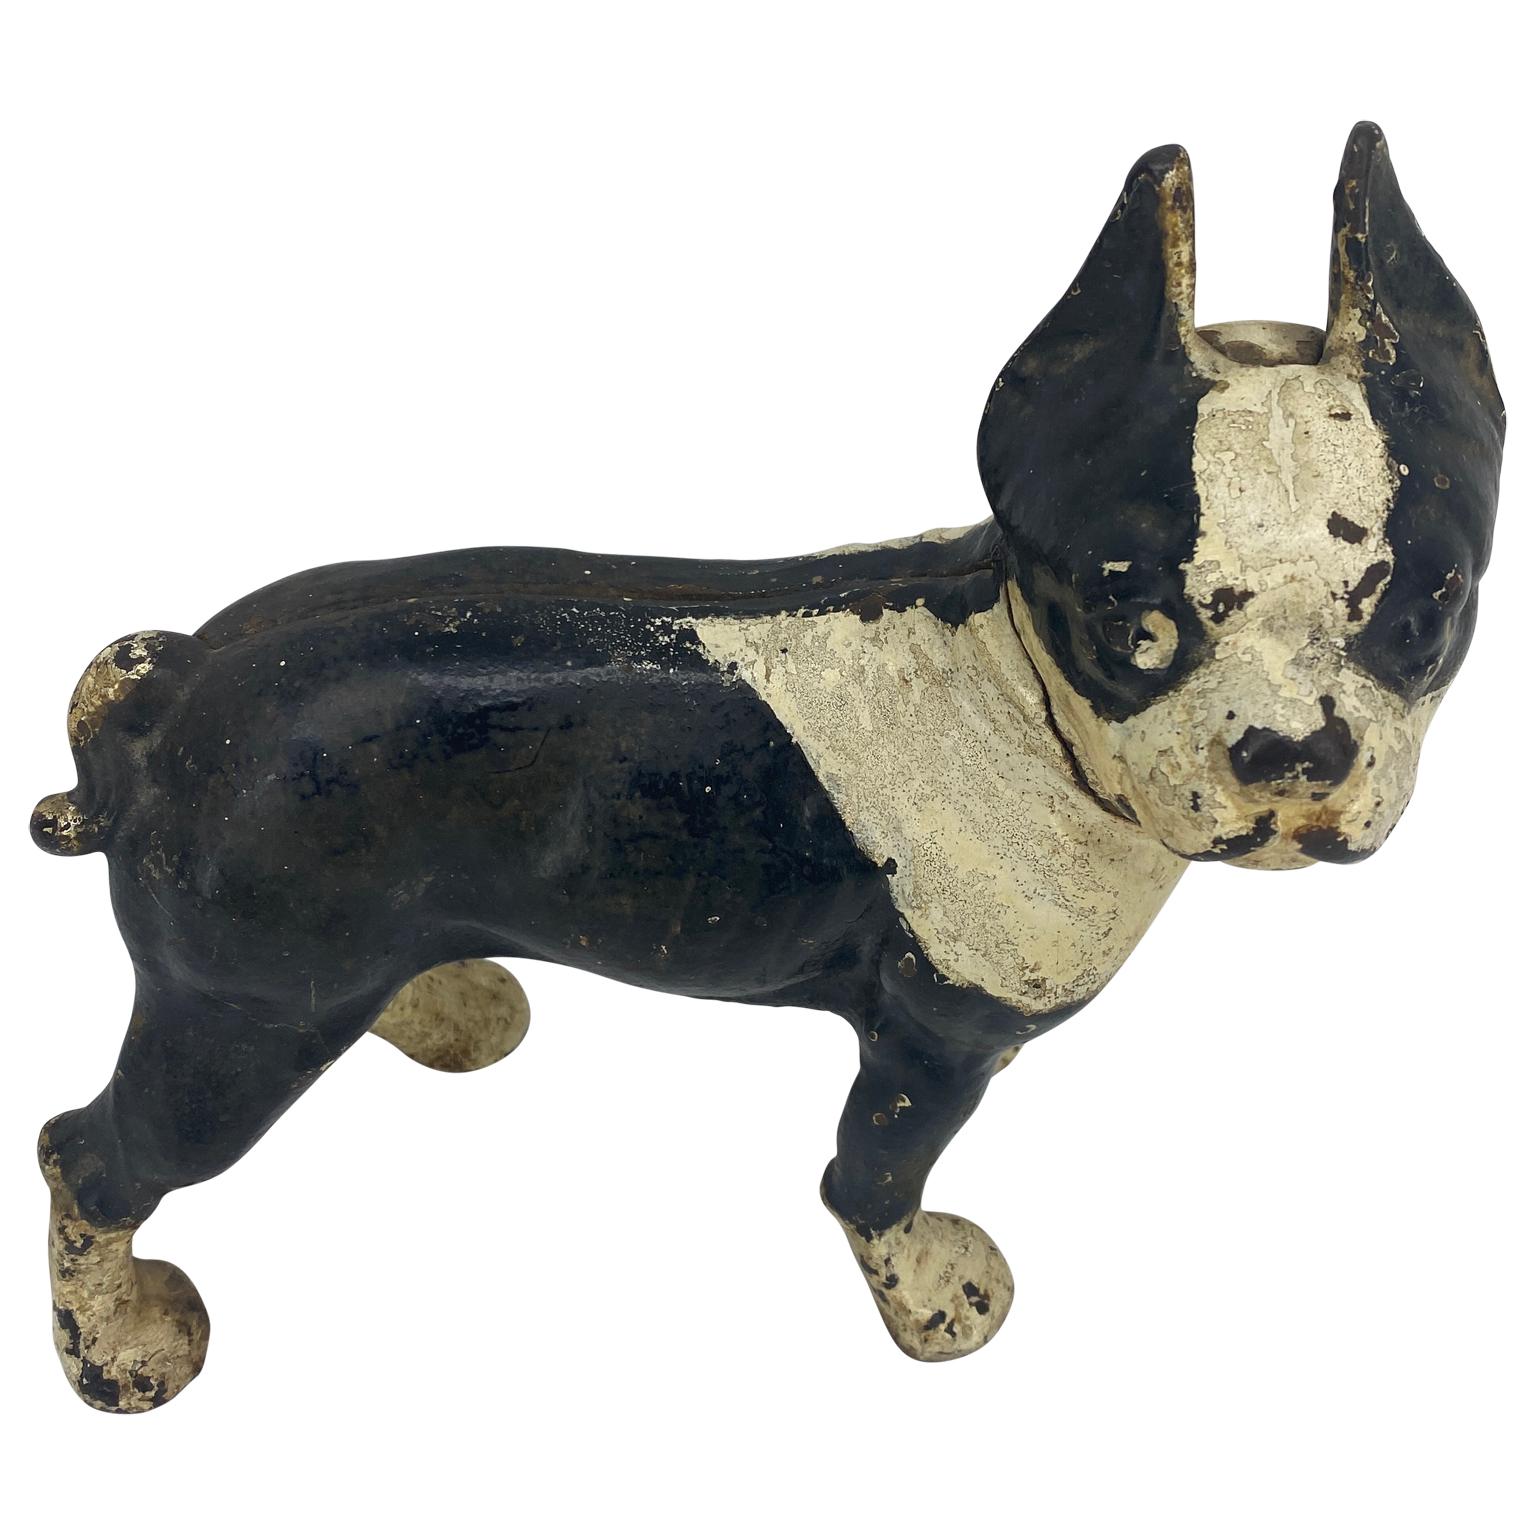 Hubley cast iron Boston terrier doorstop. Heavy and handsome, the Hubley doorstops hailing from Lancaster, Pennsylvania, have become Classic antique treasures. A wonderful collectible, the doorstop have a natural aged patina.